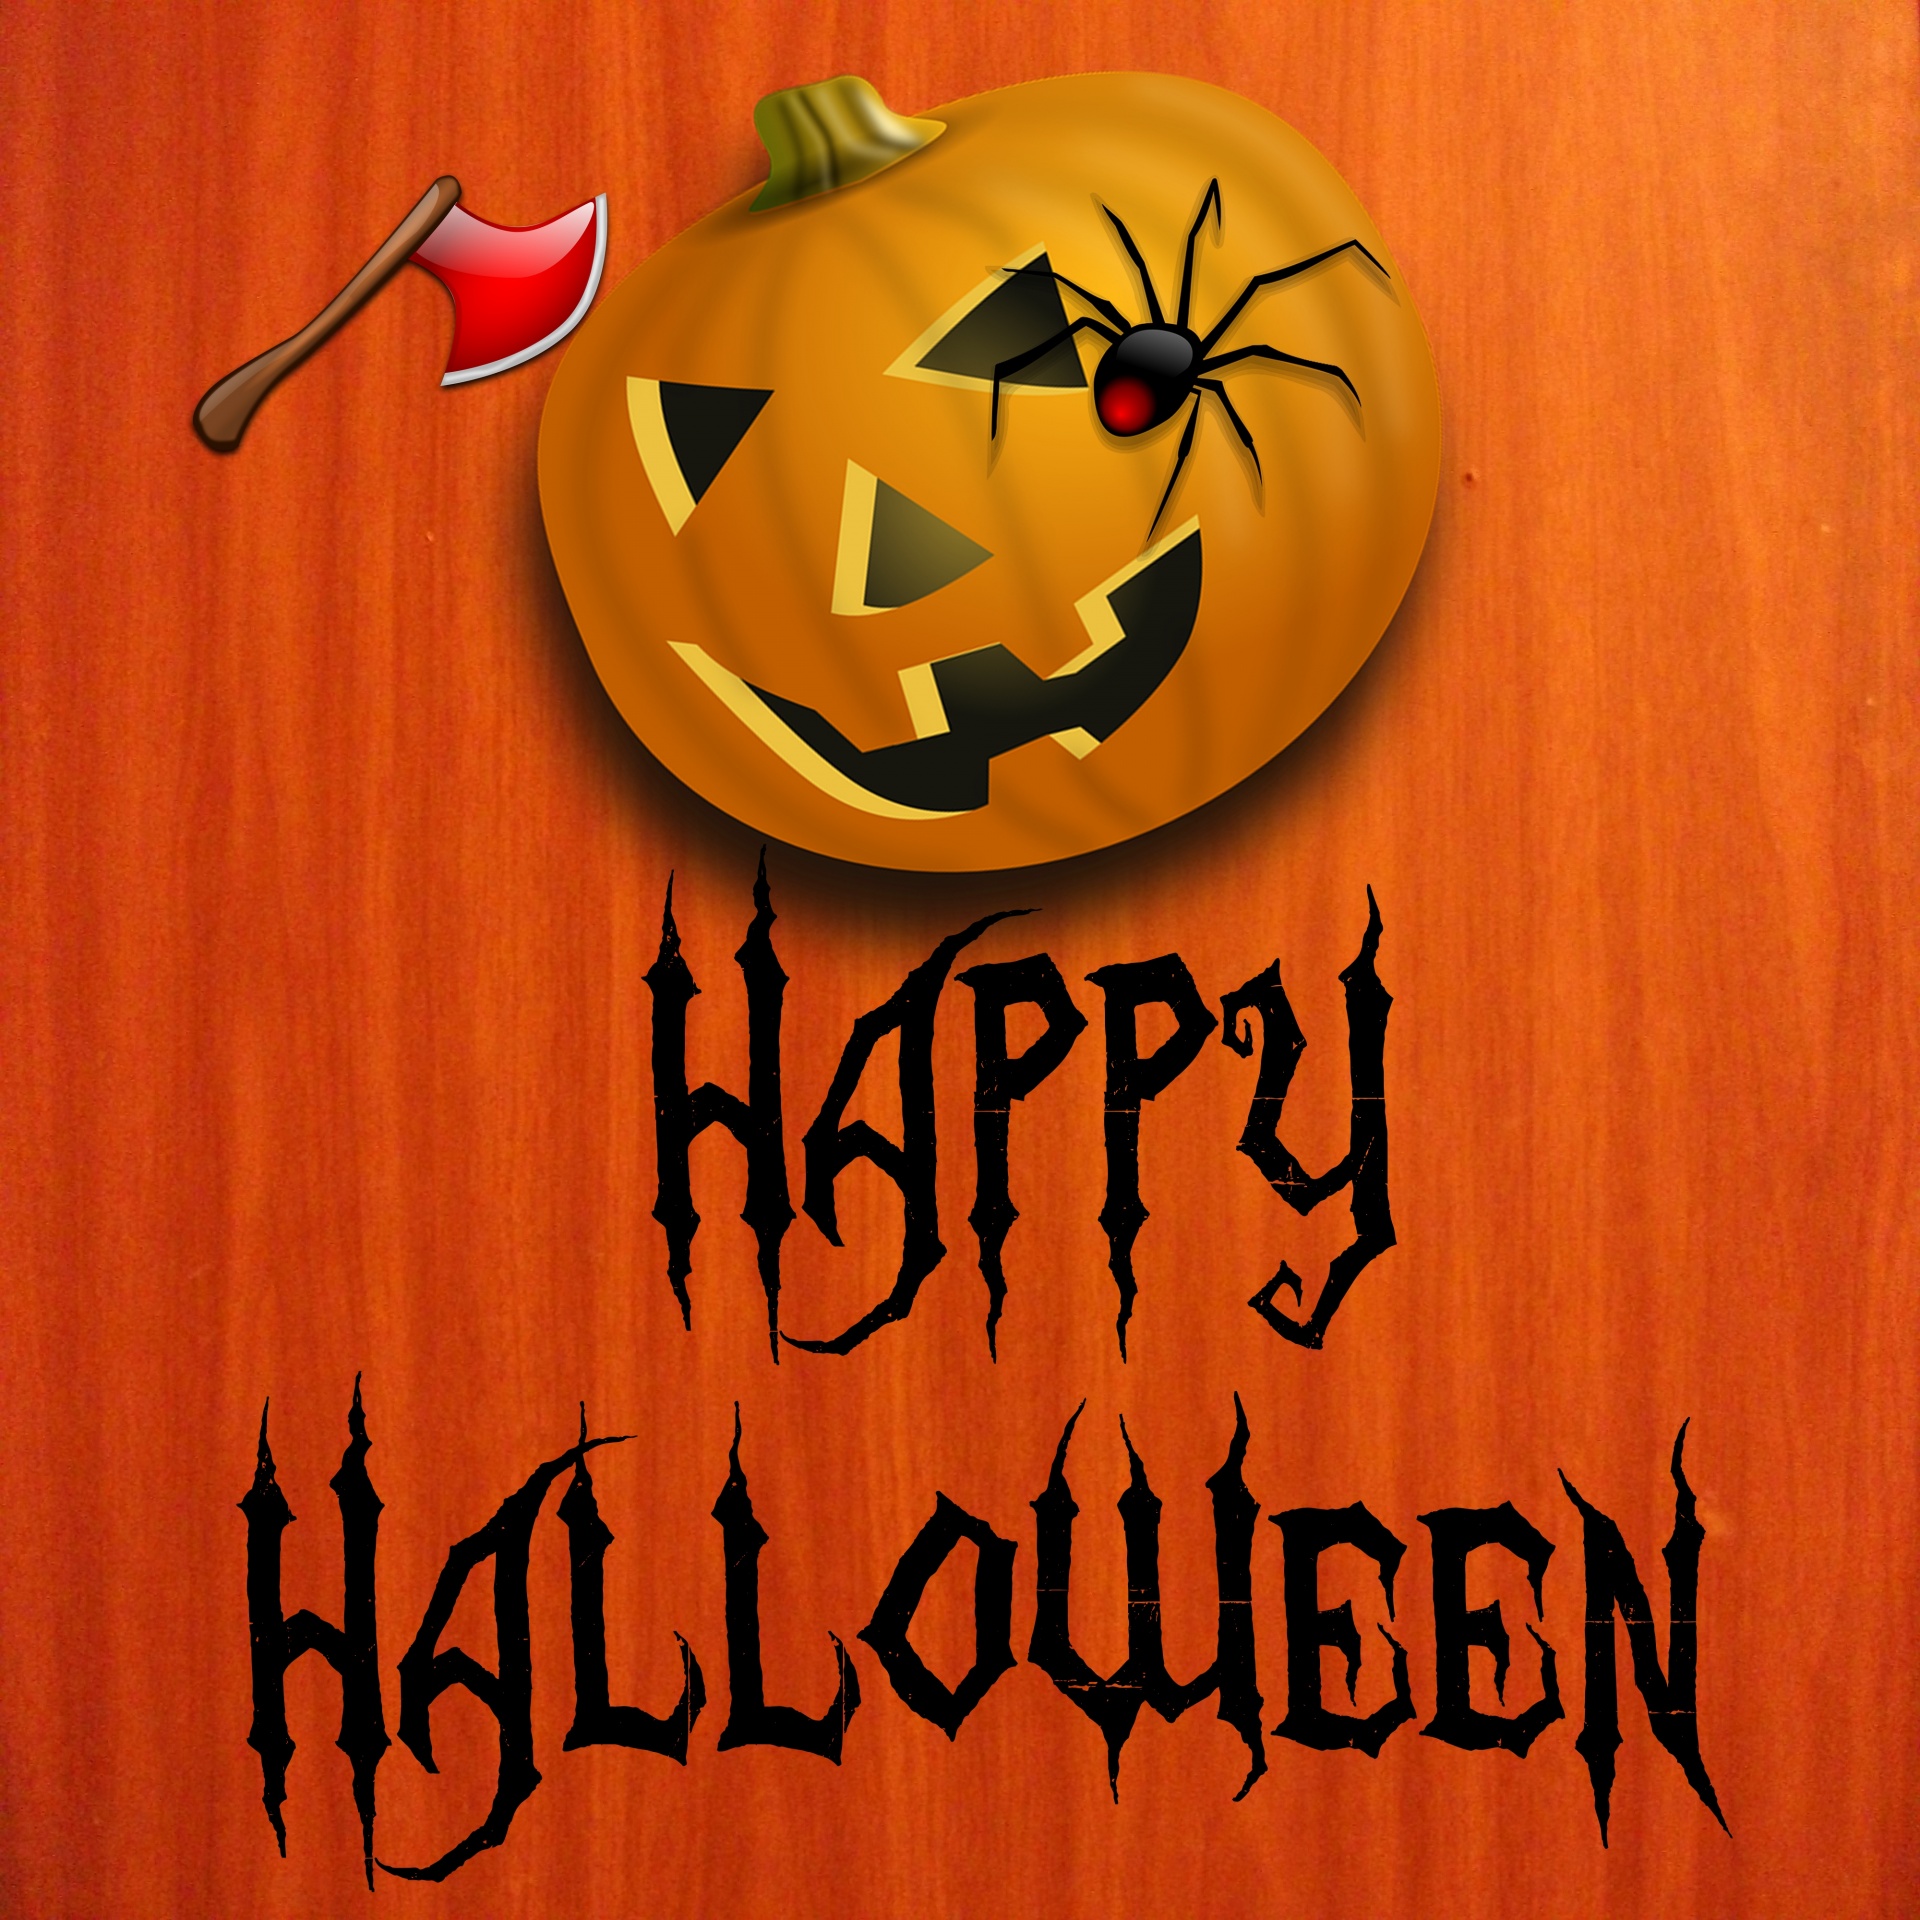 7-happy-halloween-images-to-post-on-facebook-twitter-instagram-investorplace